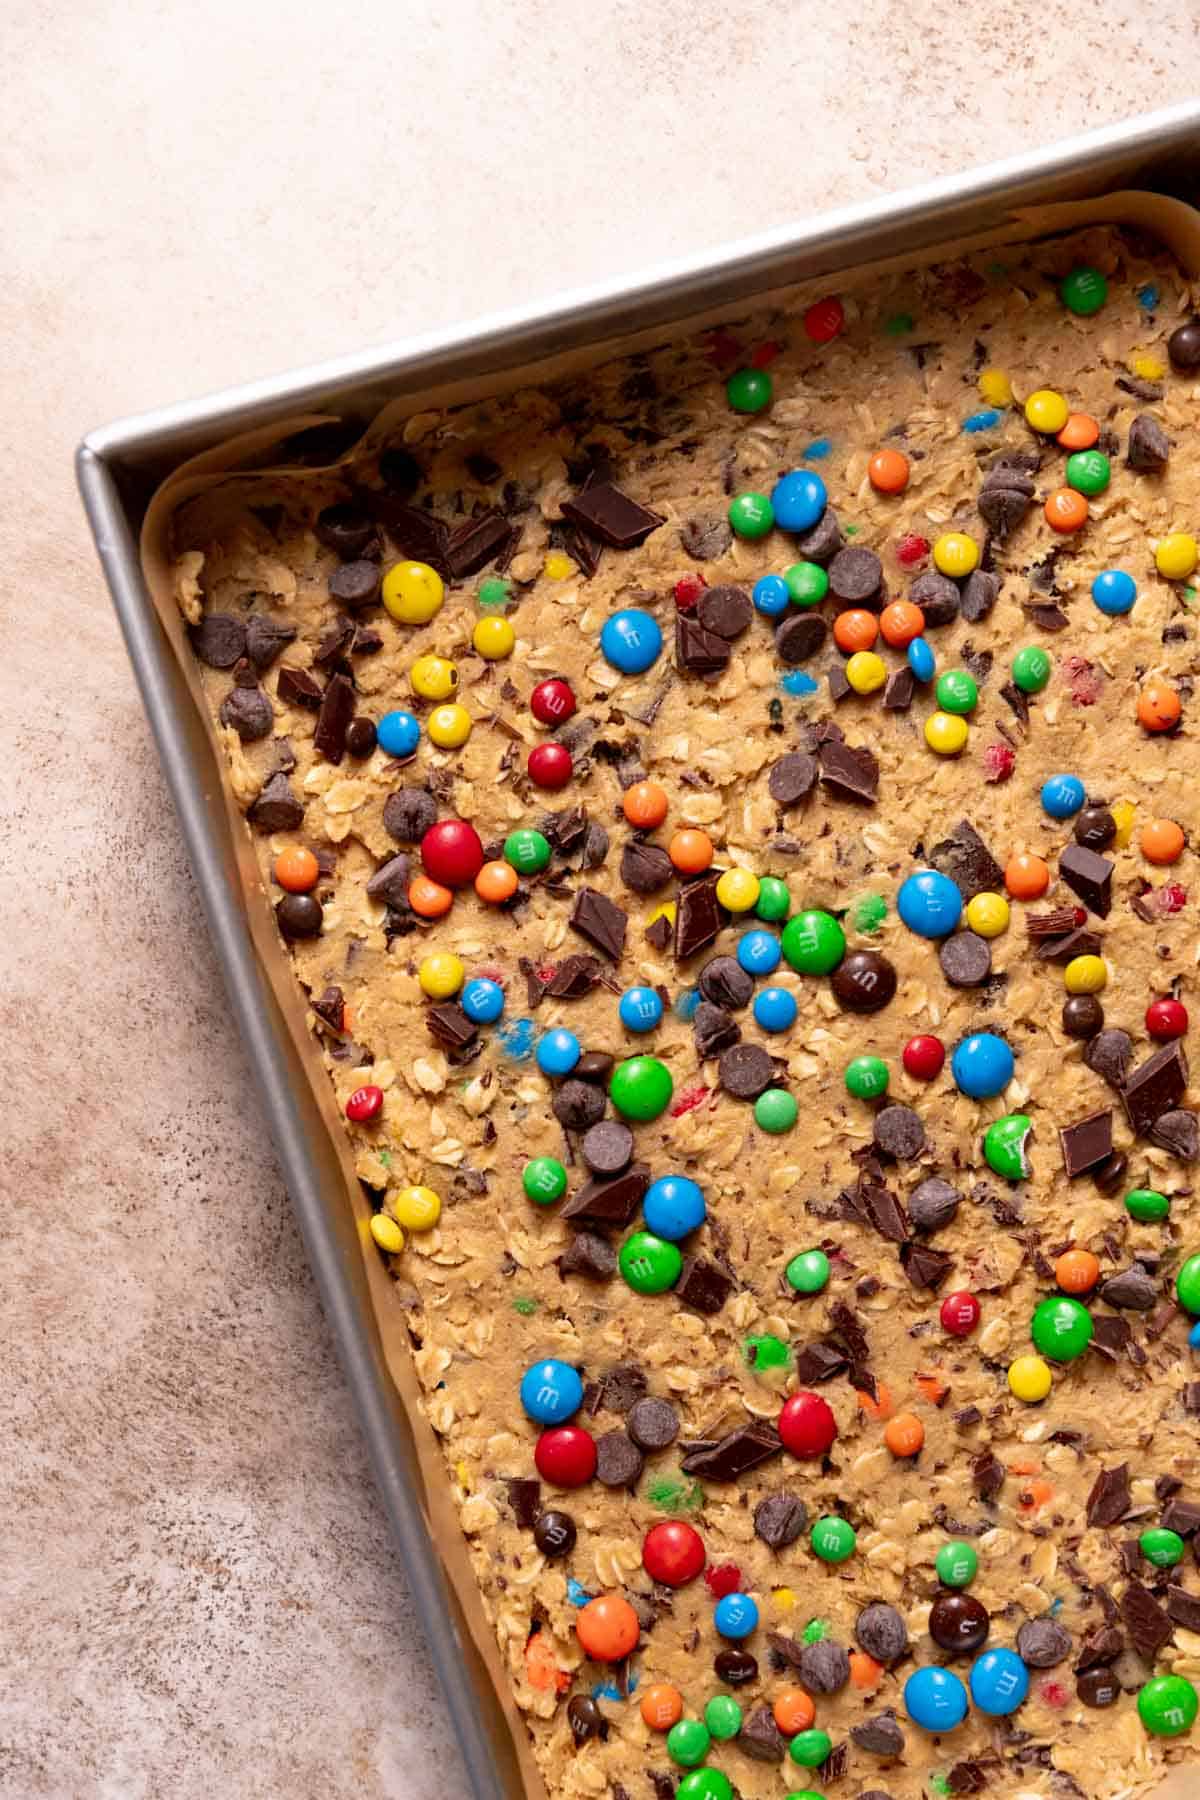 A baking pan with the peanut butter cookie dough pressed into the pan with extra candies and chocolate chips on top.